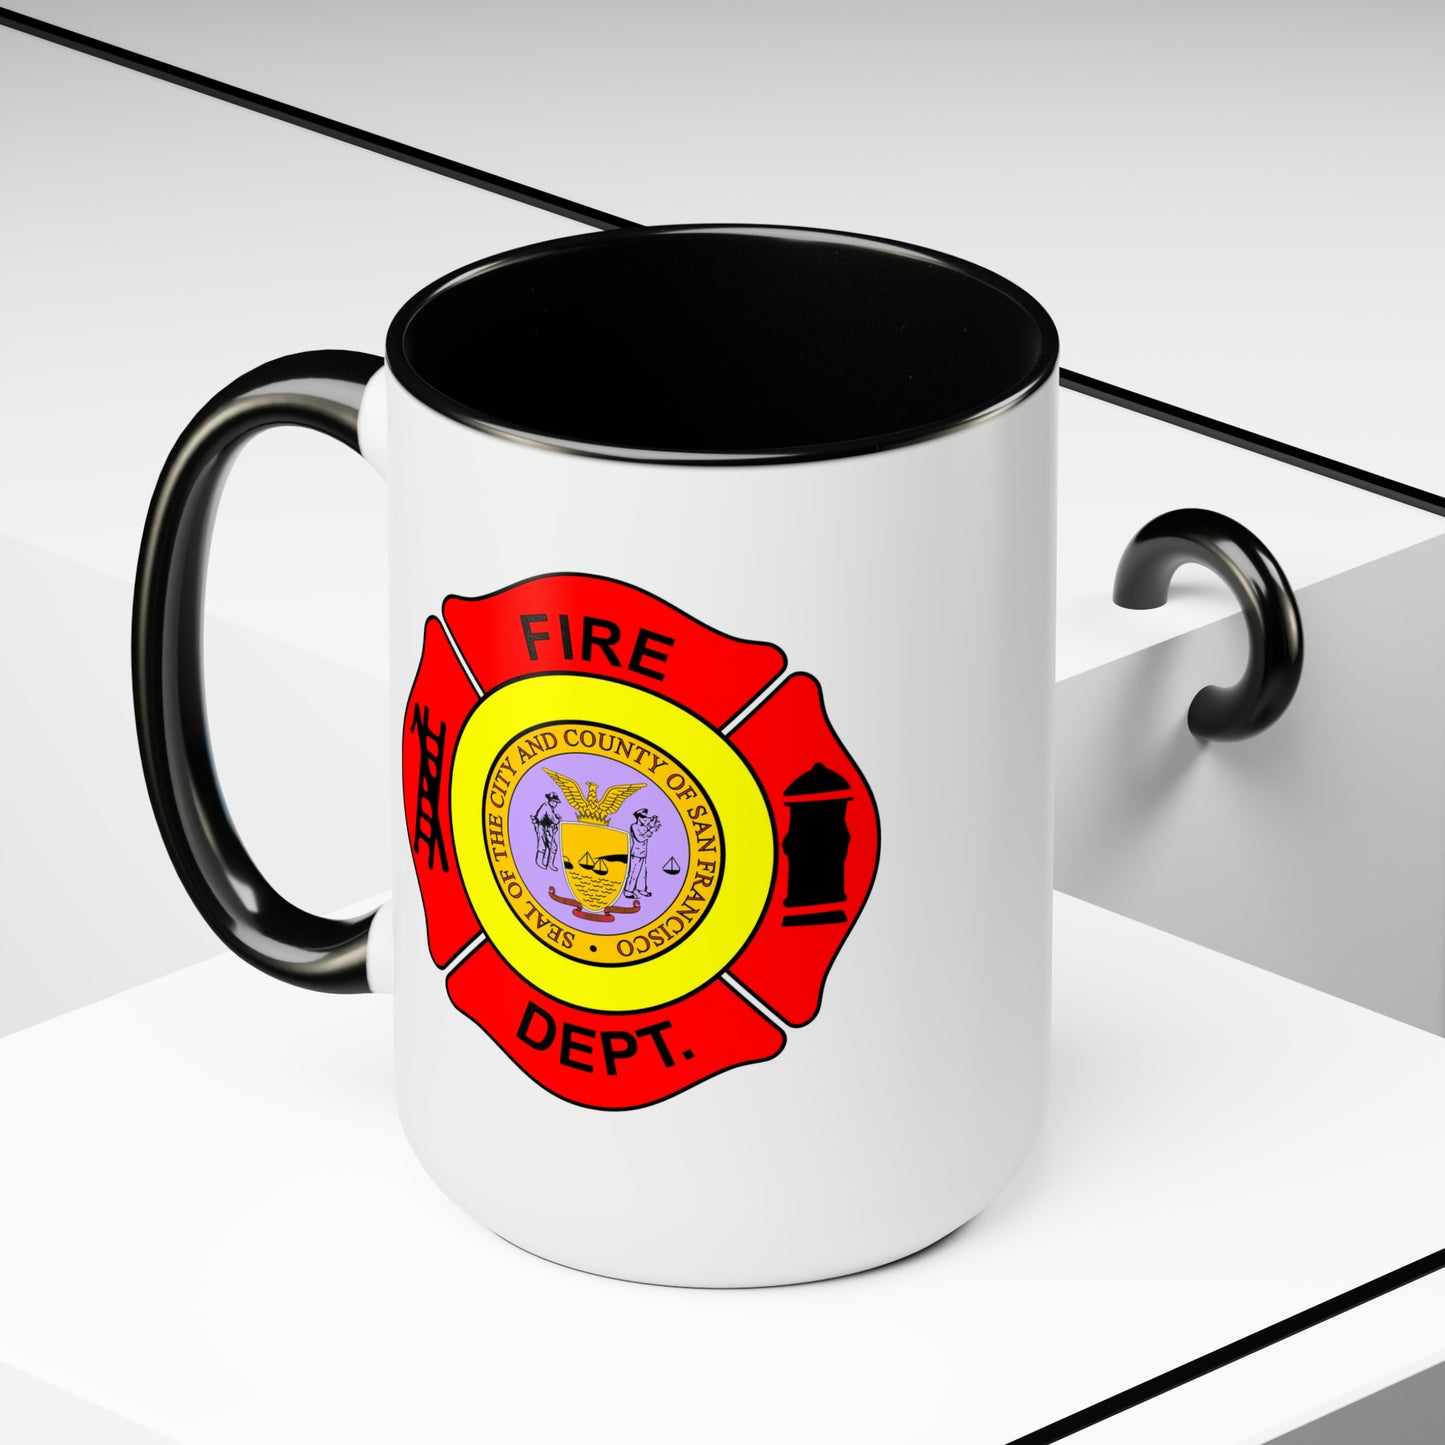 San Francisco Fire Department Coffee Mug - Double Sided Black Accent White Ceramic 15oz by TheGlassyLass